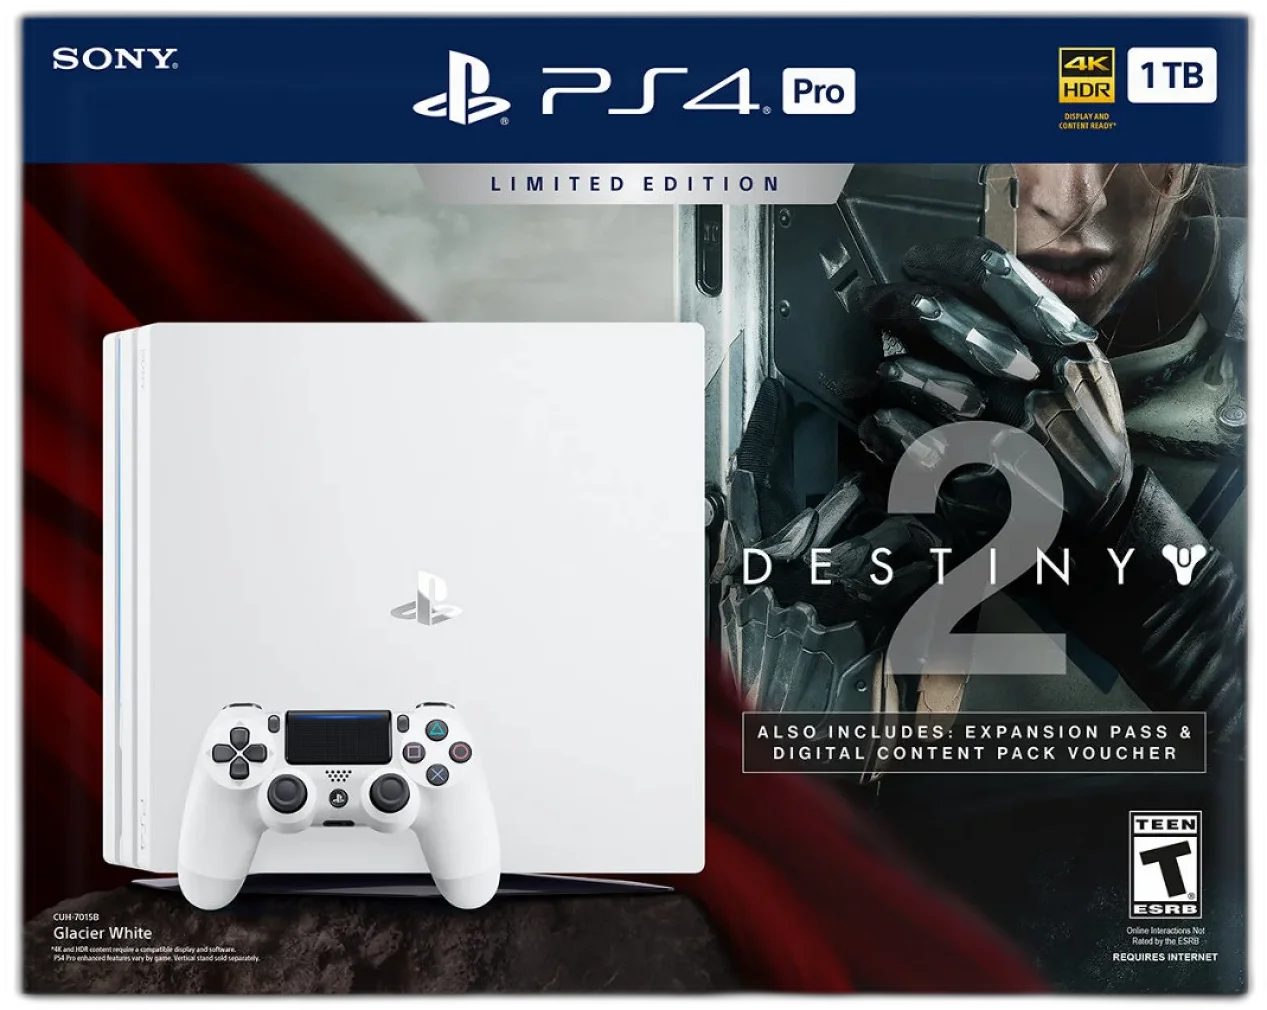 PlayStation 4 White with Destiny + Vanguard, Call of Duty: Ghosts, and PlayStation  4 Starter Pack for PlayStation 4